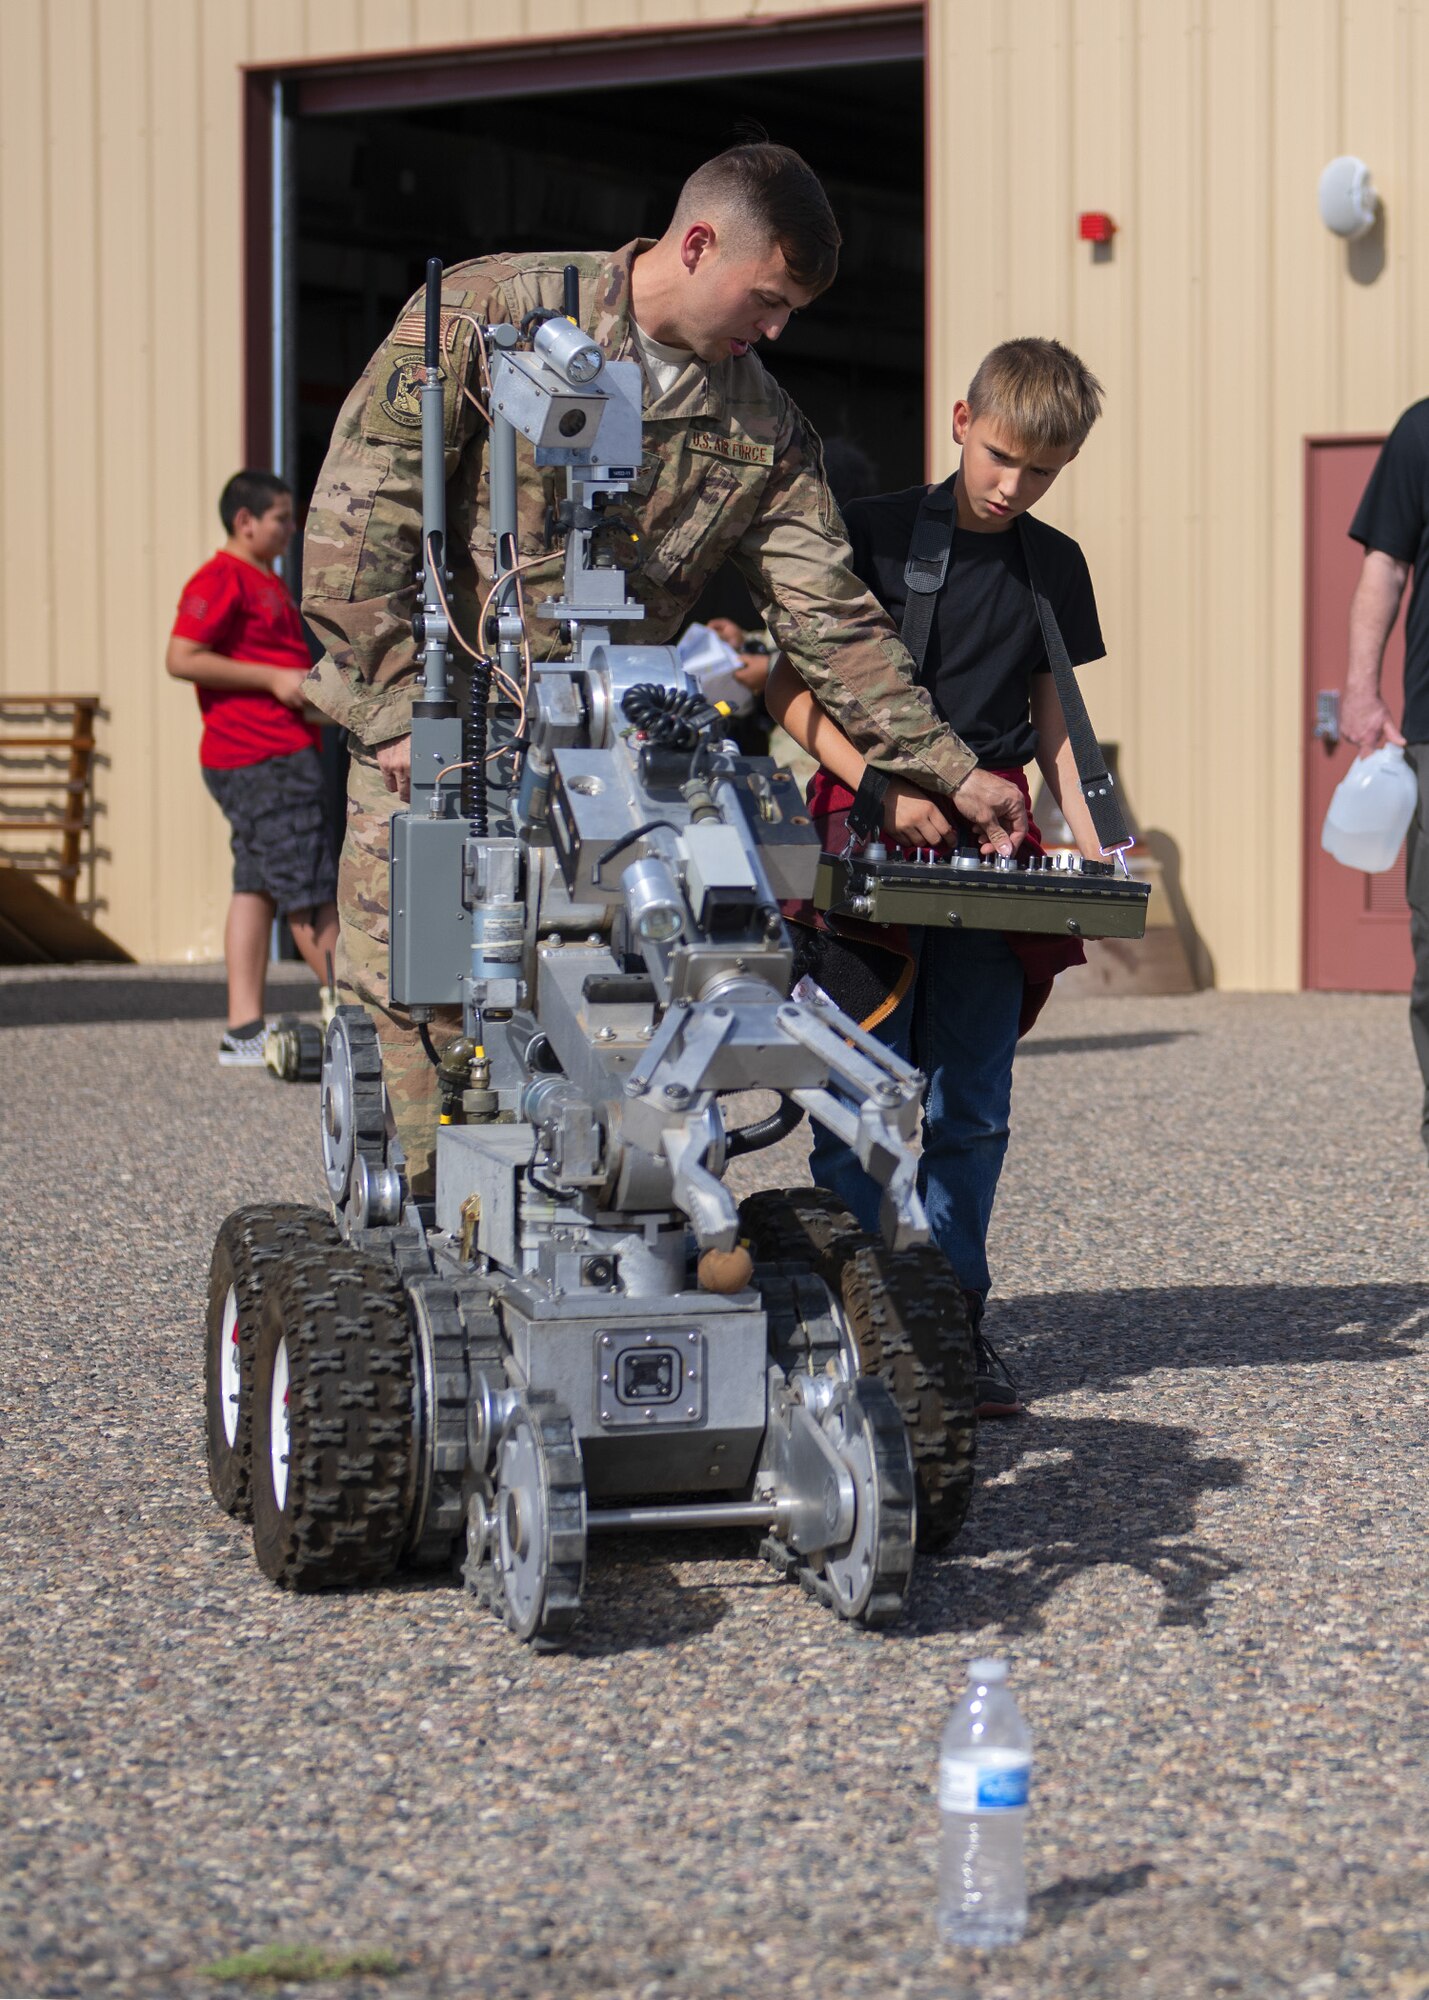 Airman 1st Class Jacob Turcotte, 56th Civil Engineer Squadron explosive ordnance disposal team member, instructs Kenneth Allen, a member of the Childhelp program, on how to use an Andros 16 bomb disposal robot during the Childhelp Kids Day of Hope tour Oct. 16, 2019, at Luke Air Force Base, Ariz.